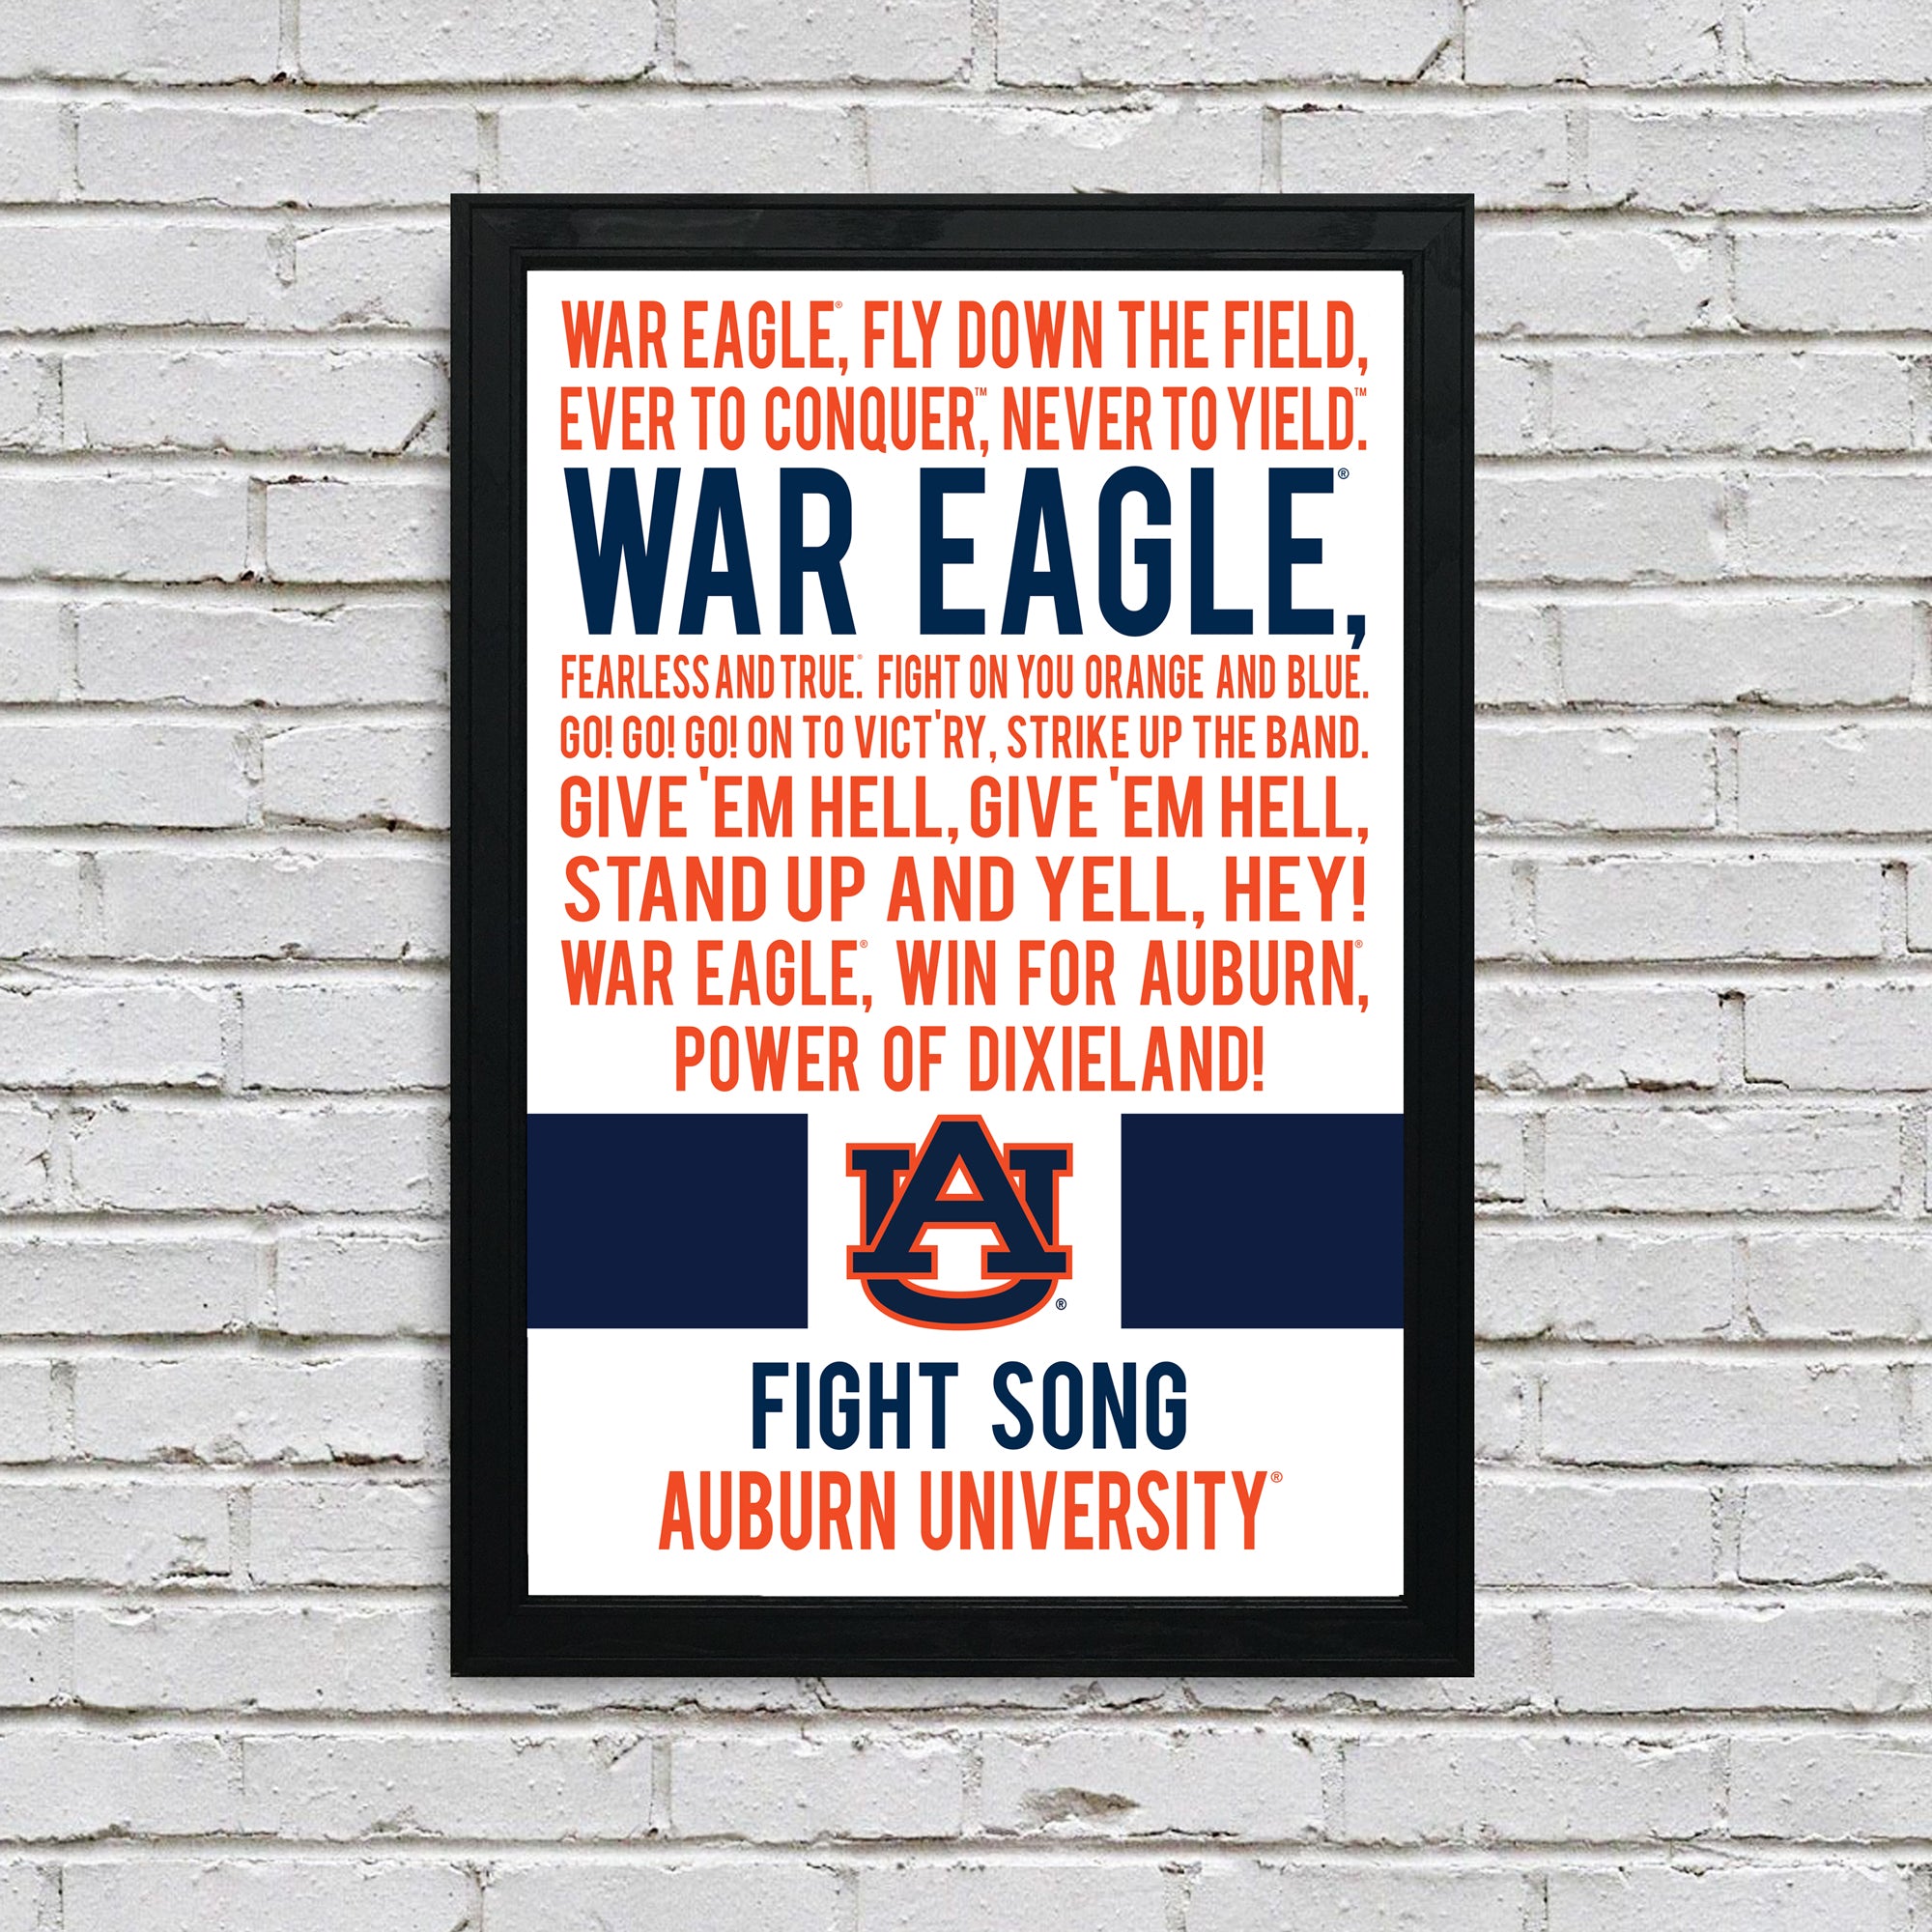 Limited Edition Auburn Tigers War Eagle Fight Song Poster - Officially